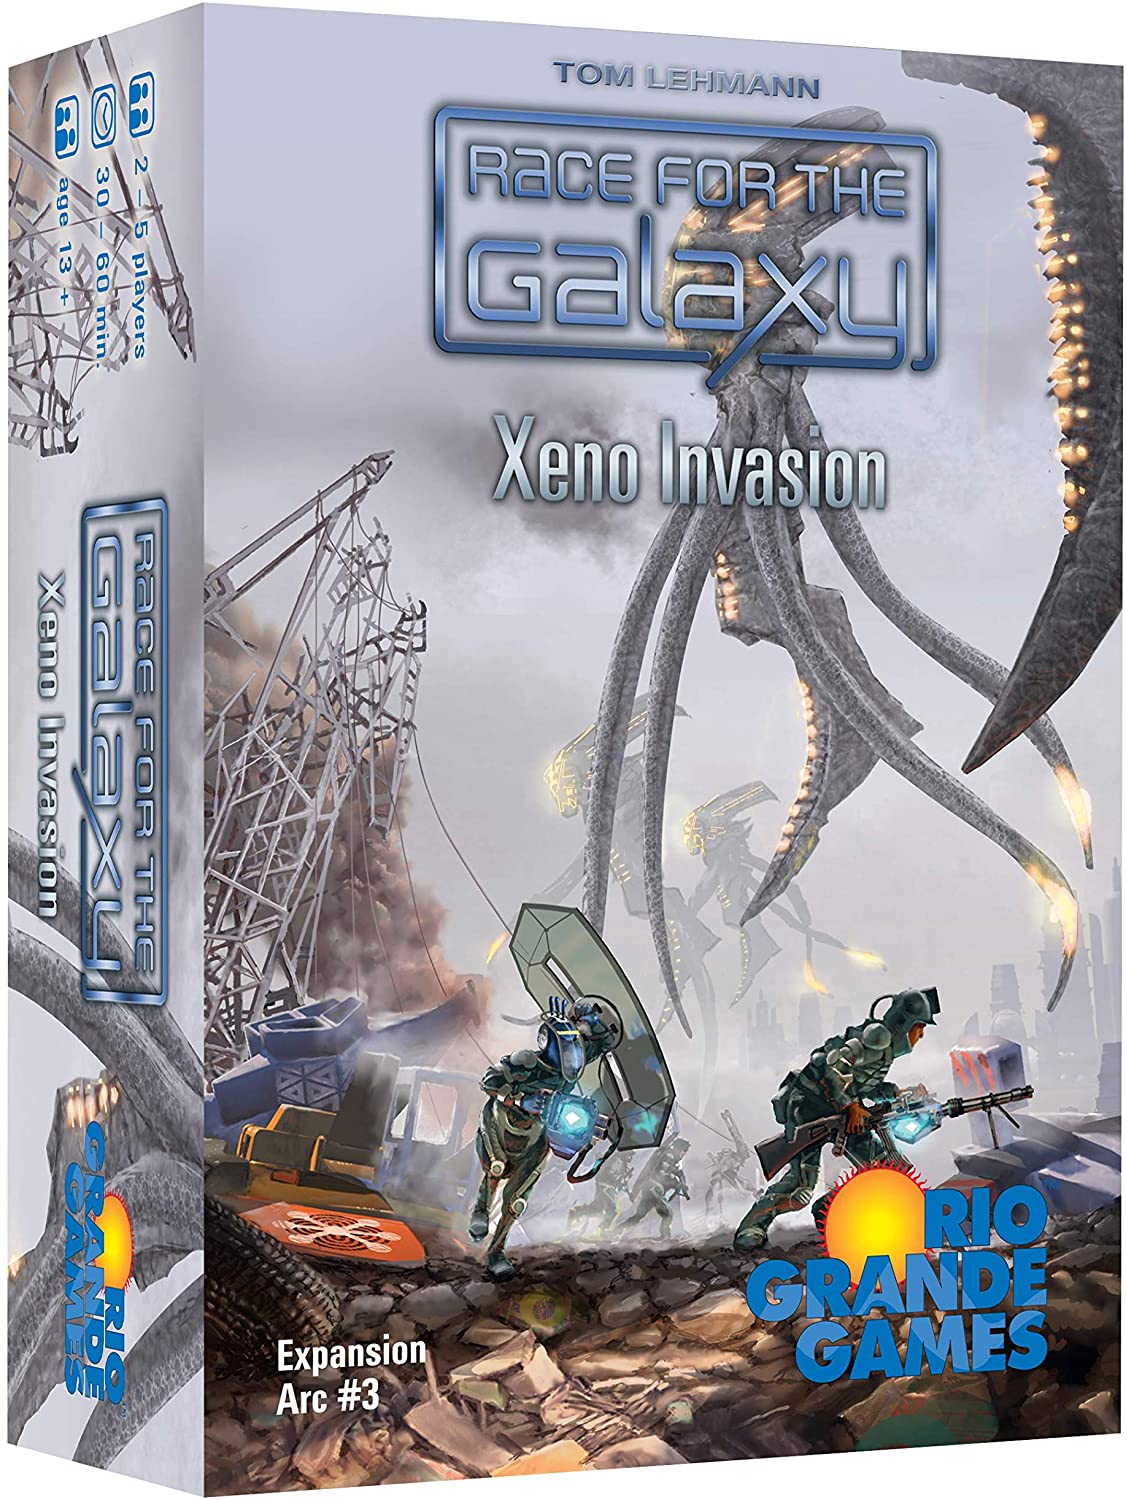 RACE FOR THE GALAXY XENO INVASION